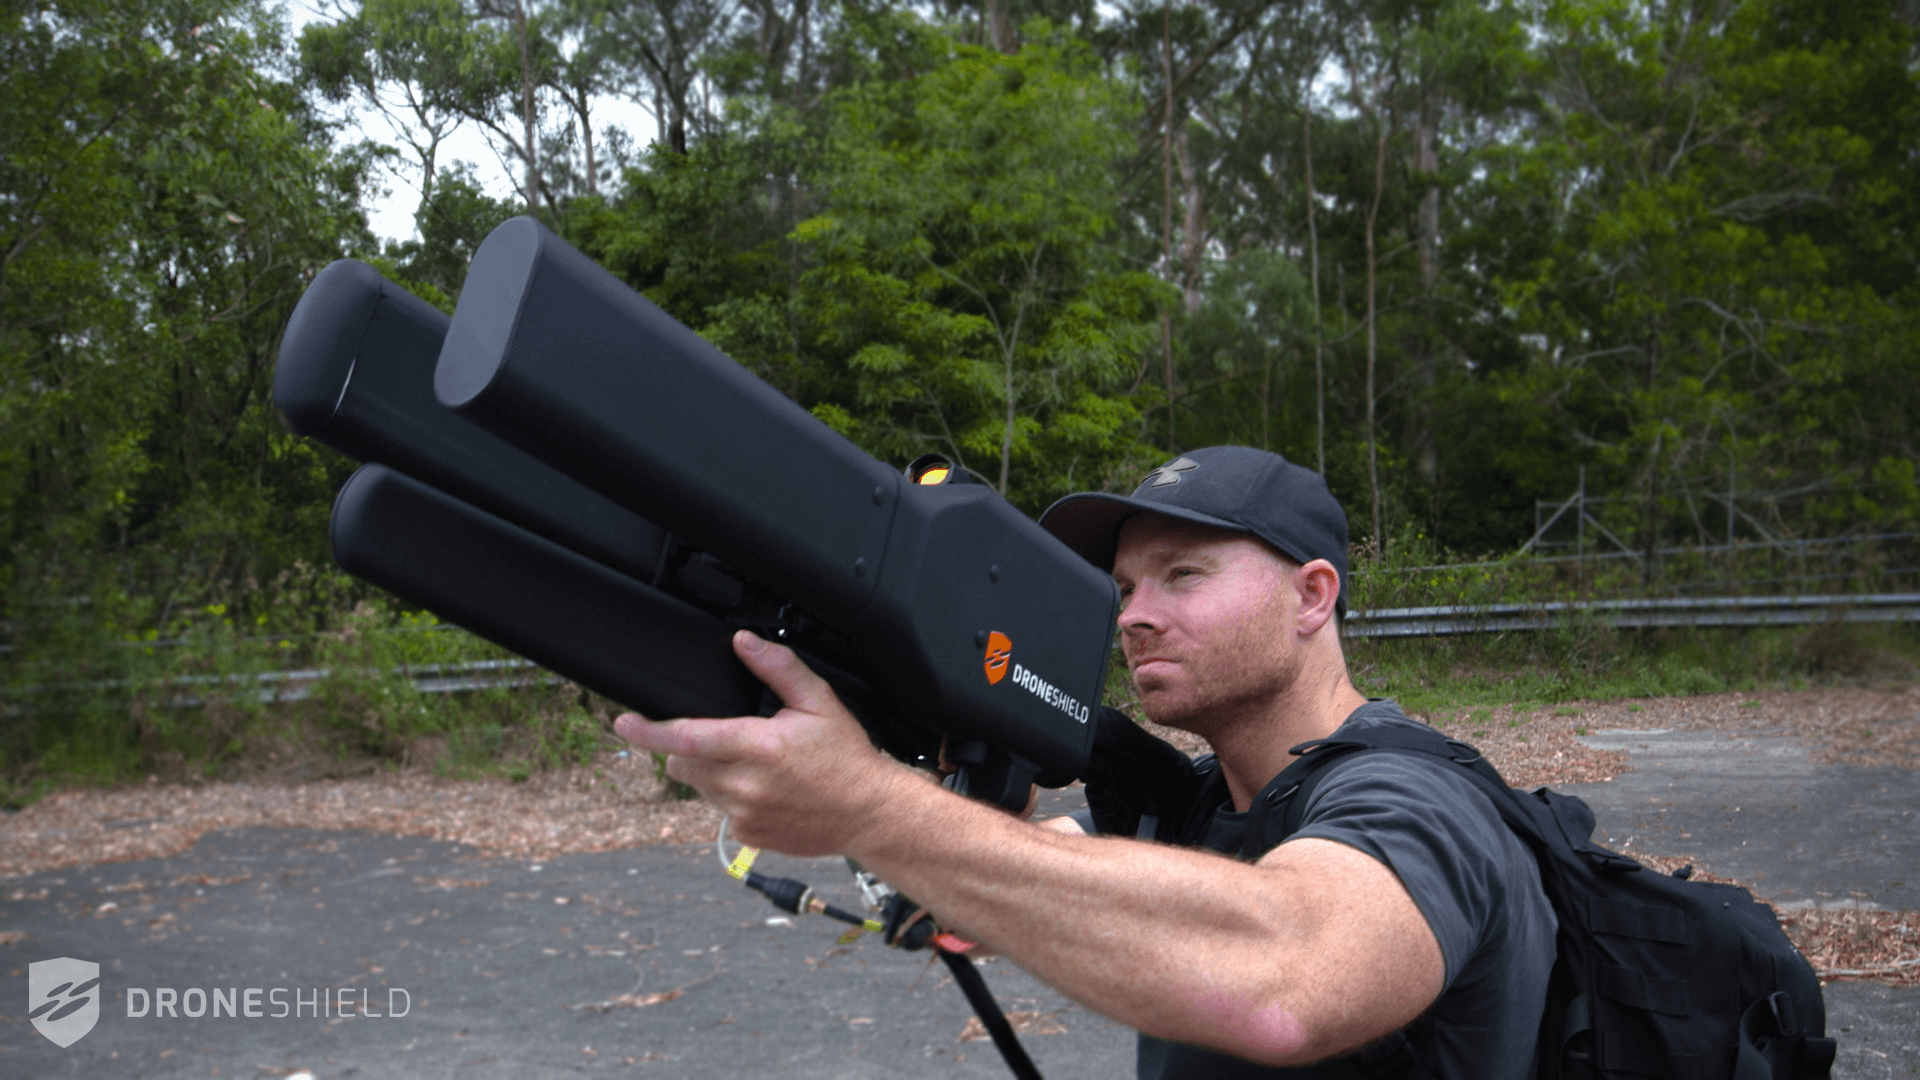 This drone gun knocks drones out of the sky gently, with radio waves